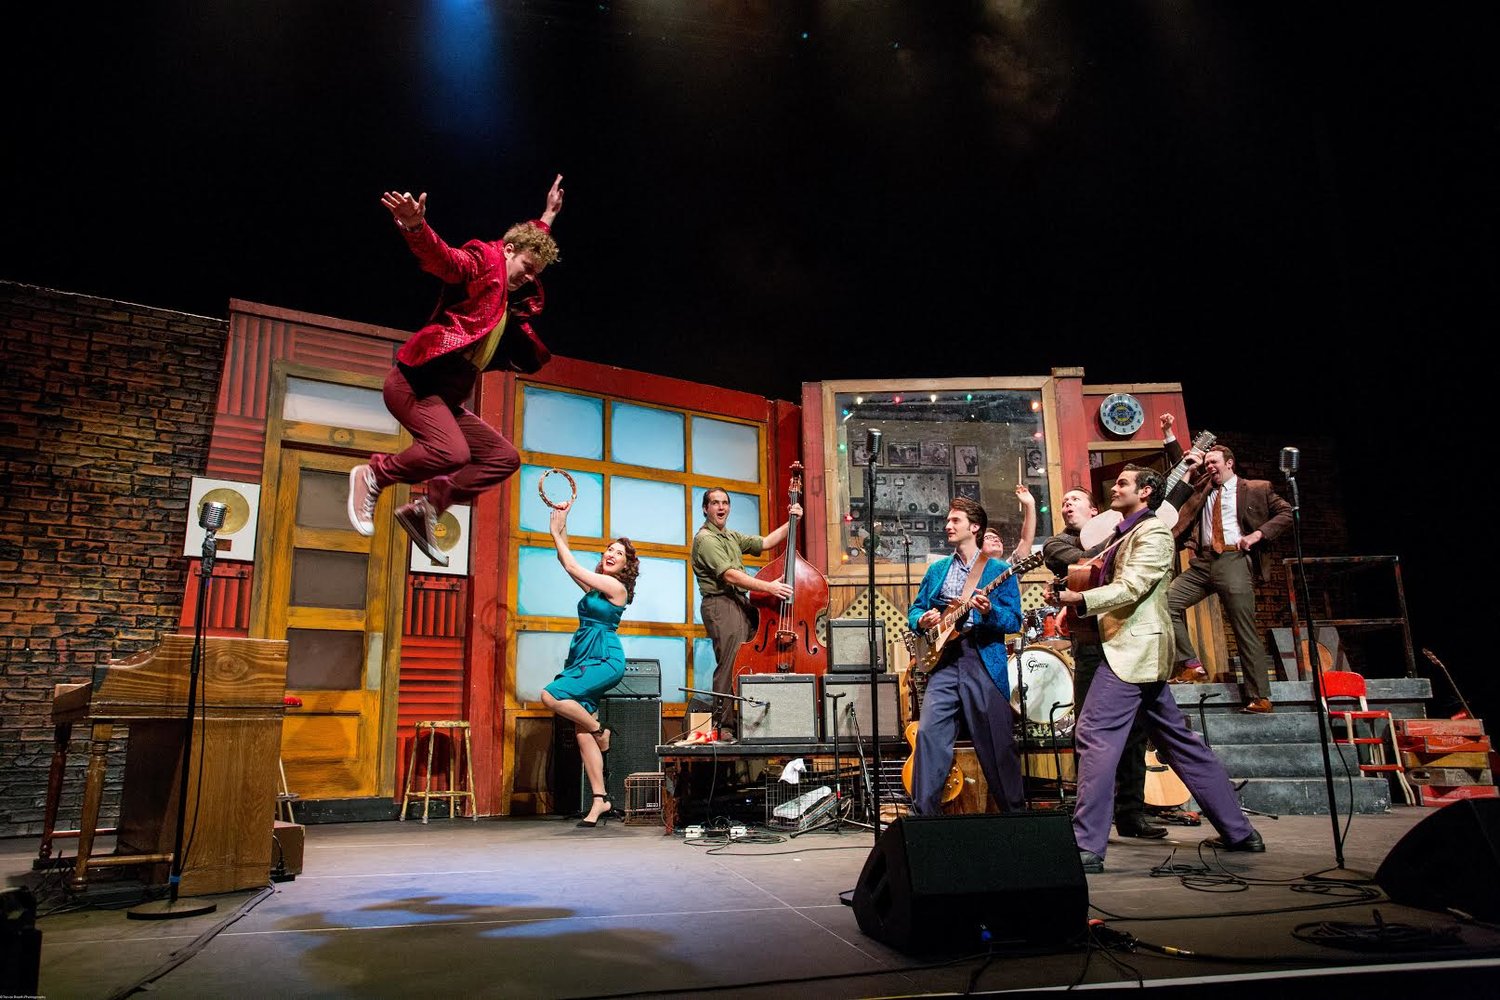 The Gateway’s “Million Dollar Quartet” opened August 4. (Left to right) Trevor Dorner (Jerry Lee Lewis), Taylor Dane (Dyanne), Justin Bendel (Brother Jay on bass), Nathan Burke (Carl Perkins on electric guitar), Mike Luccetti (Fluke on drums in back), Steven Lasiter (Johnny Cash on guitar), Jacob Barton (Elvis Presley) and San Casey Flanagan (Sam Phillips pumping his fist) play an exuberant encore.